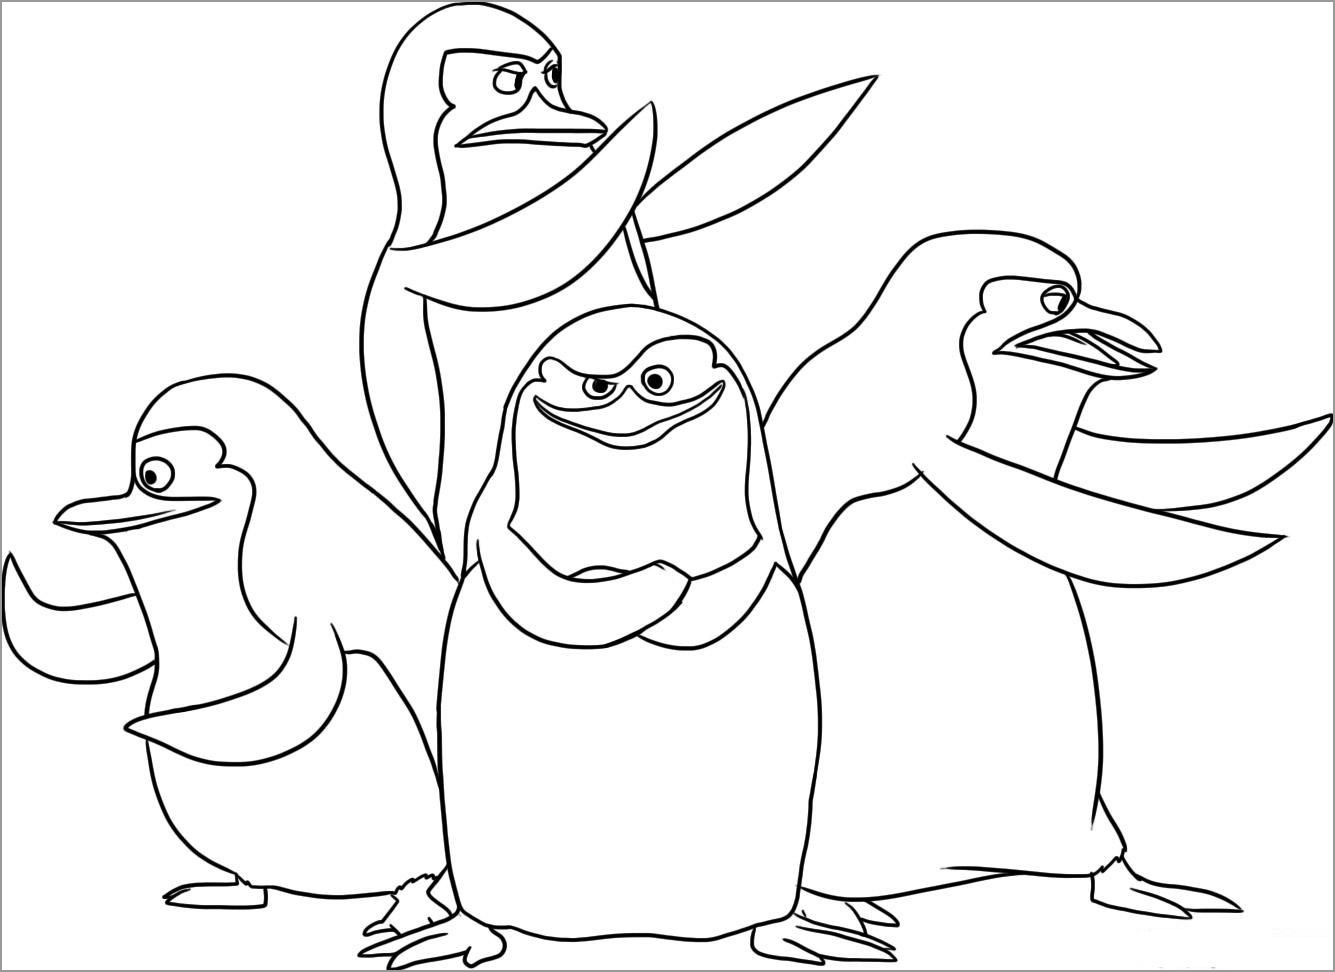 Penguins Madagascar Animals Coloring Page for Adult